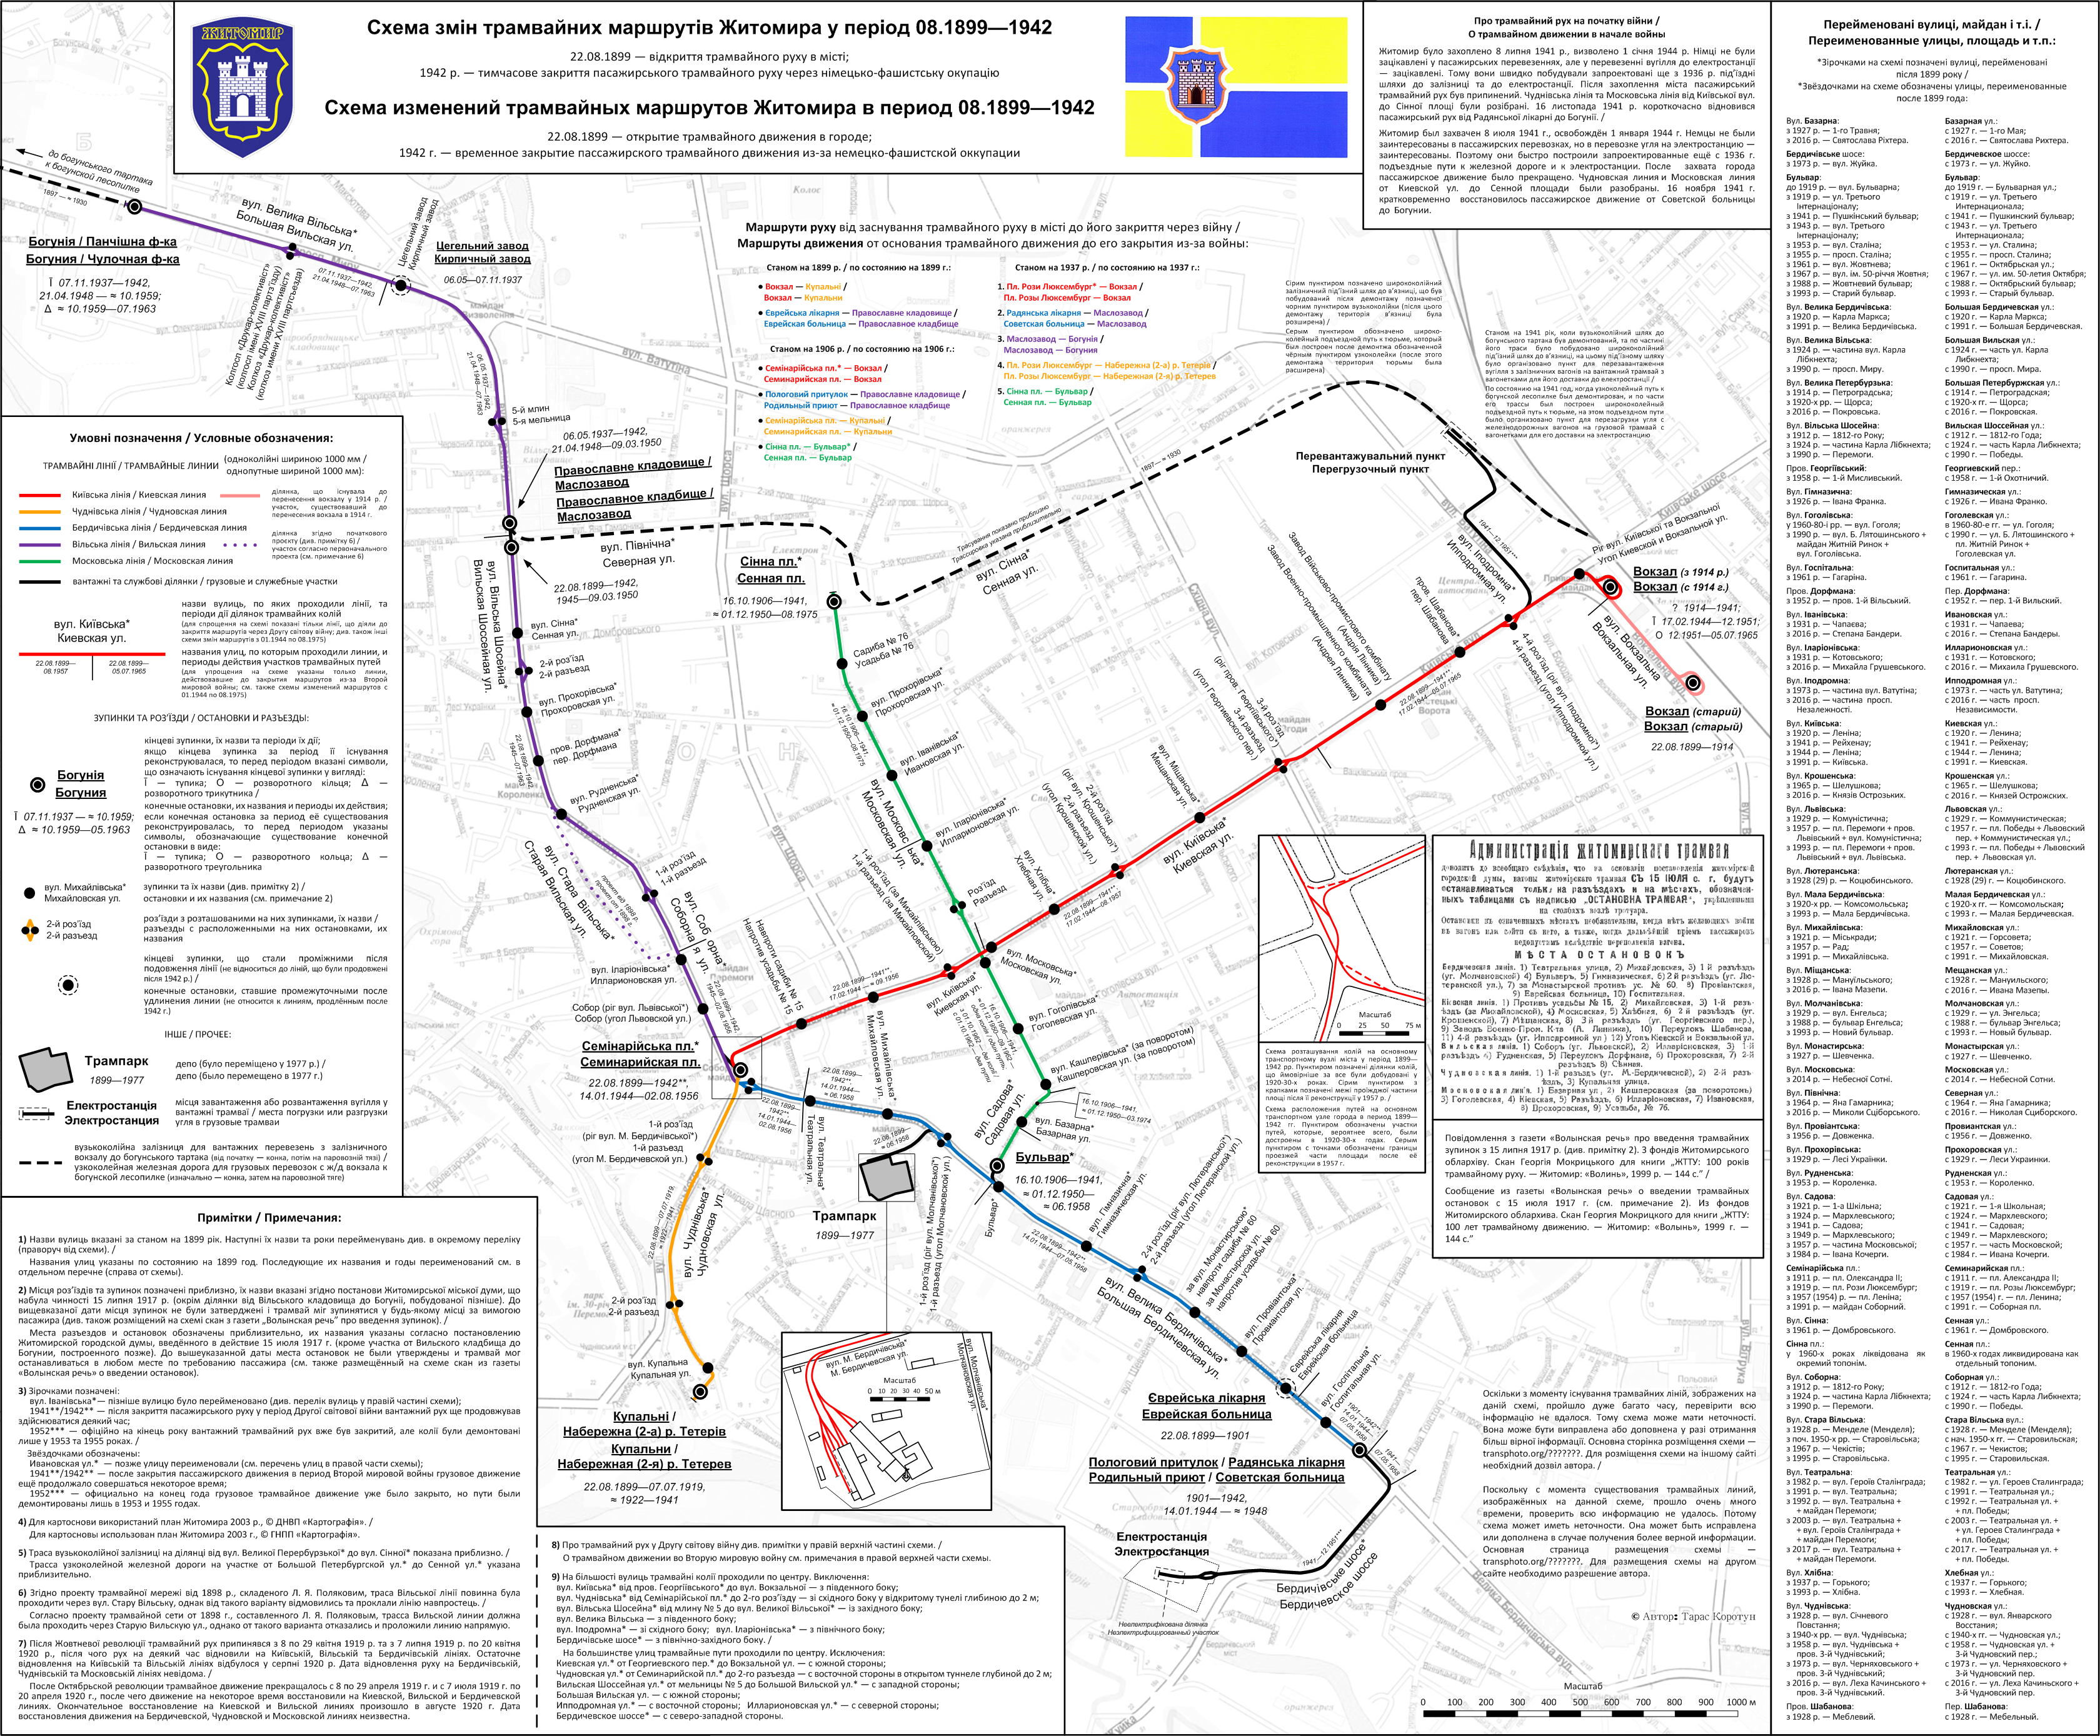 Zhytomyr — Maps of changes in the tram network in the 1899—1975